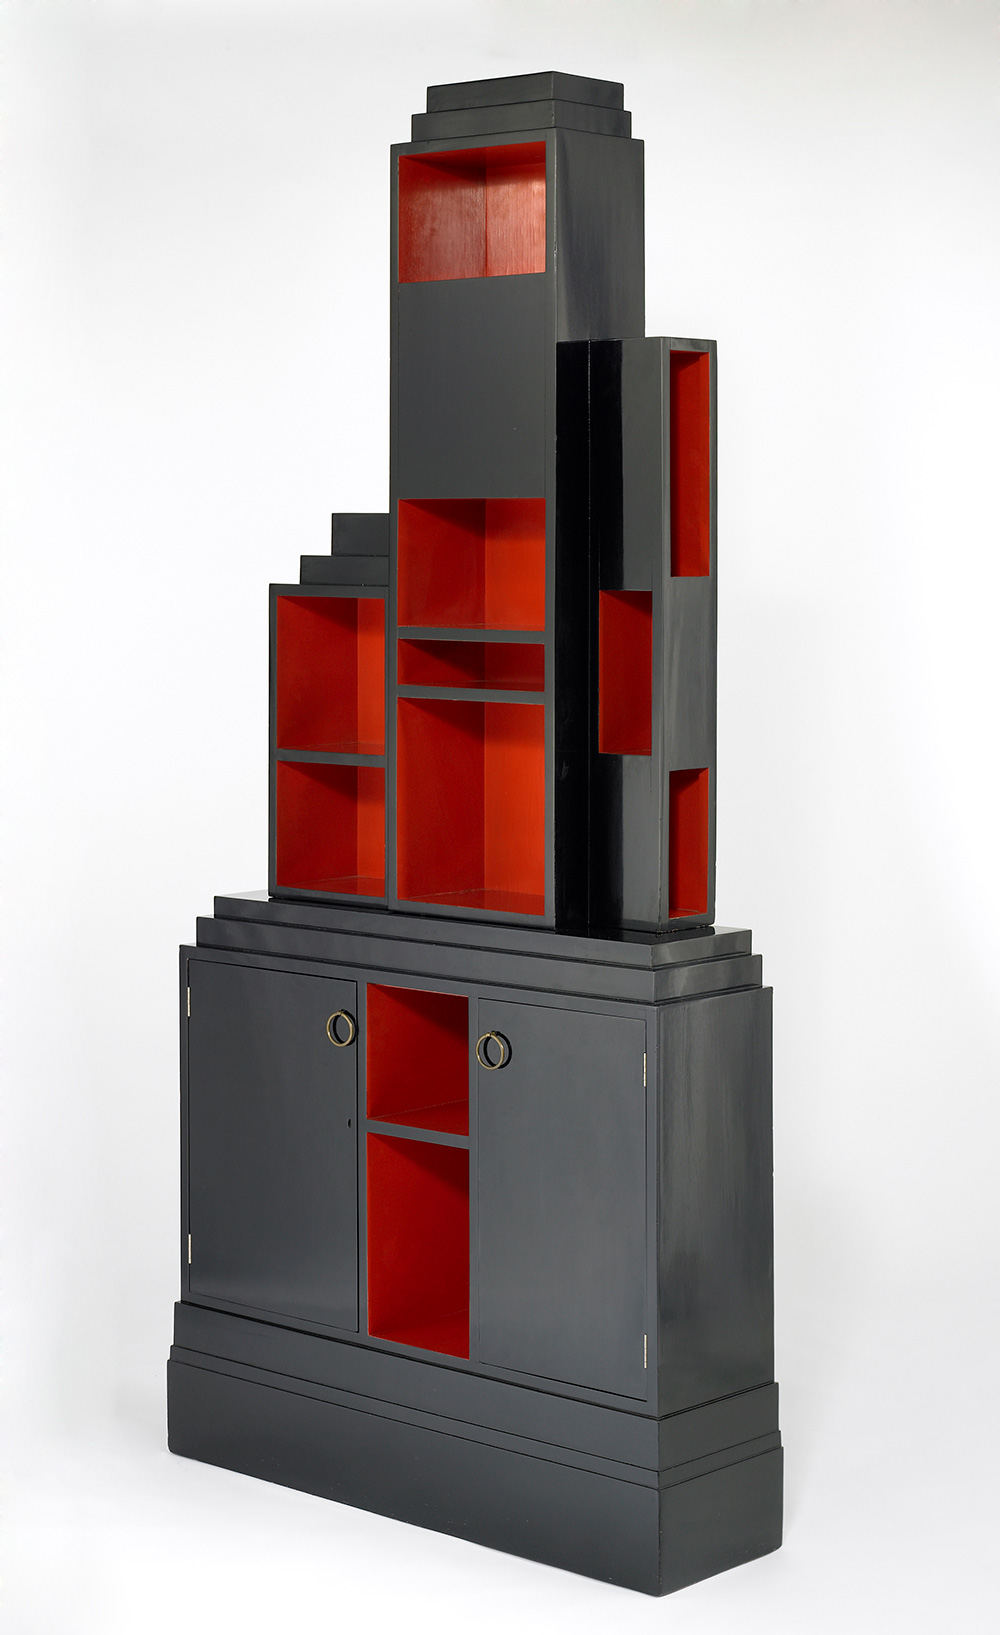 Paul T. Frankl, "Skyscraper" bookcase, ca. 1926. Lacquered wood and brass, 7 ft. 11 1/2 in. x 43 in. 13 in. (242.6 x 109.2 x 33 cm) Minneapolis Institute of Art, The Robert J. Ulrich Works of Art Purchase Fund, 2007.3a-d. © Minneapolis Institute of Art